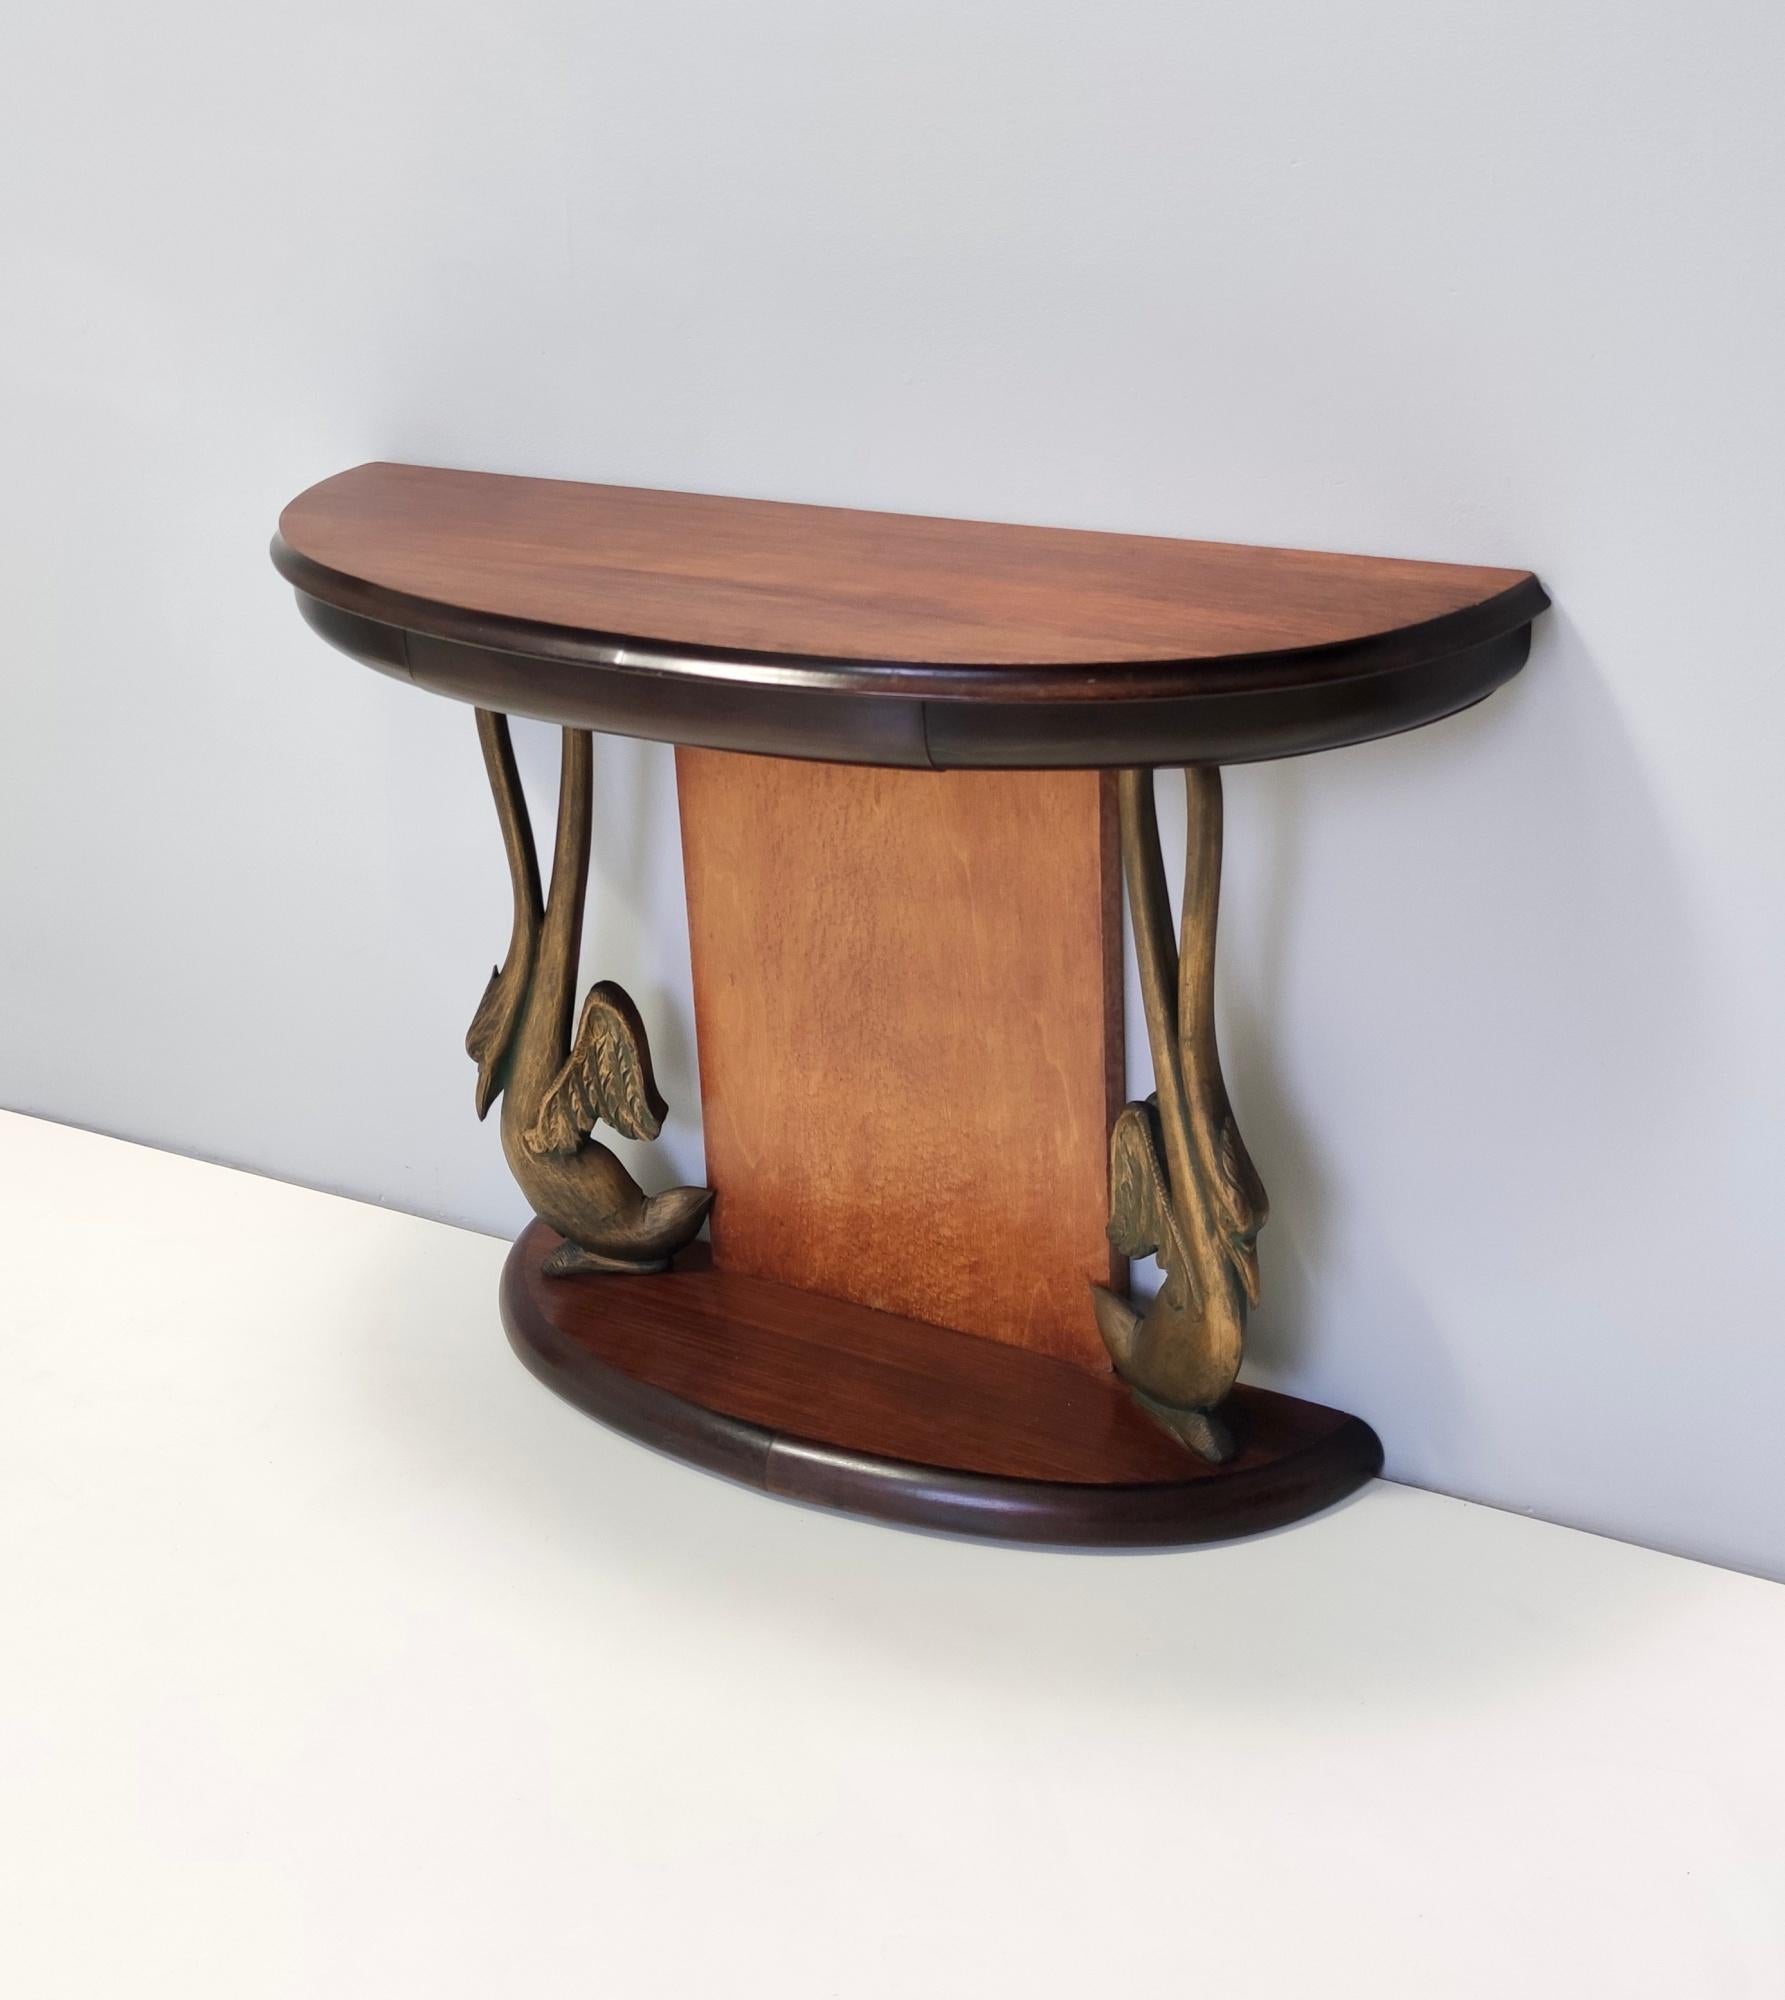 Empire Vintage Sculptural Swan Motif Canaletto Walnut Console Table by Dassi, Italy